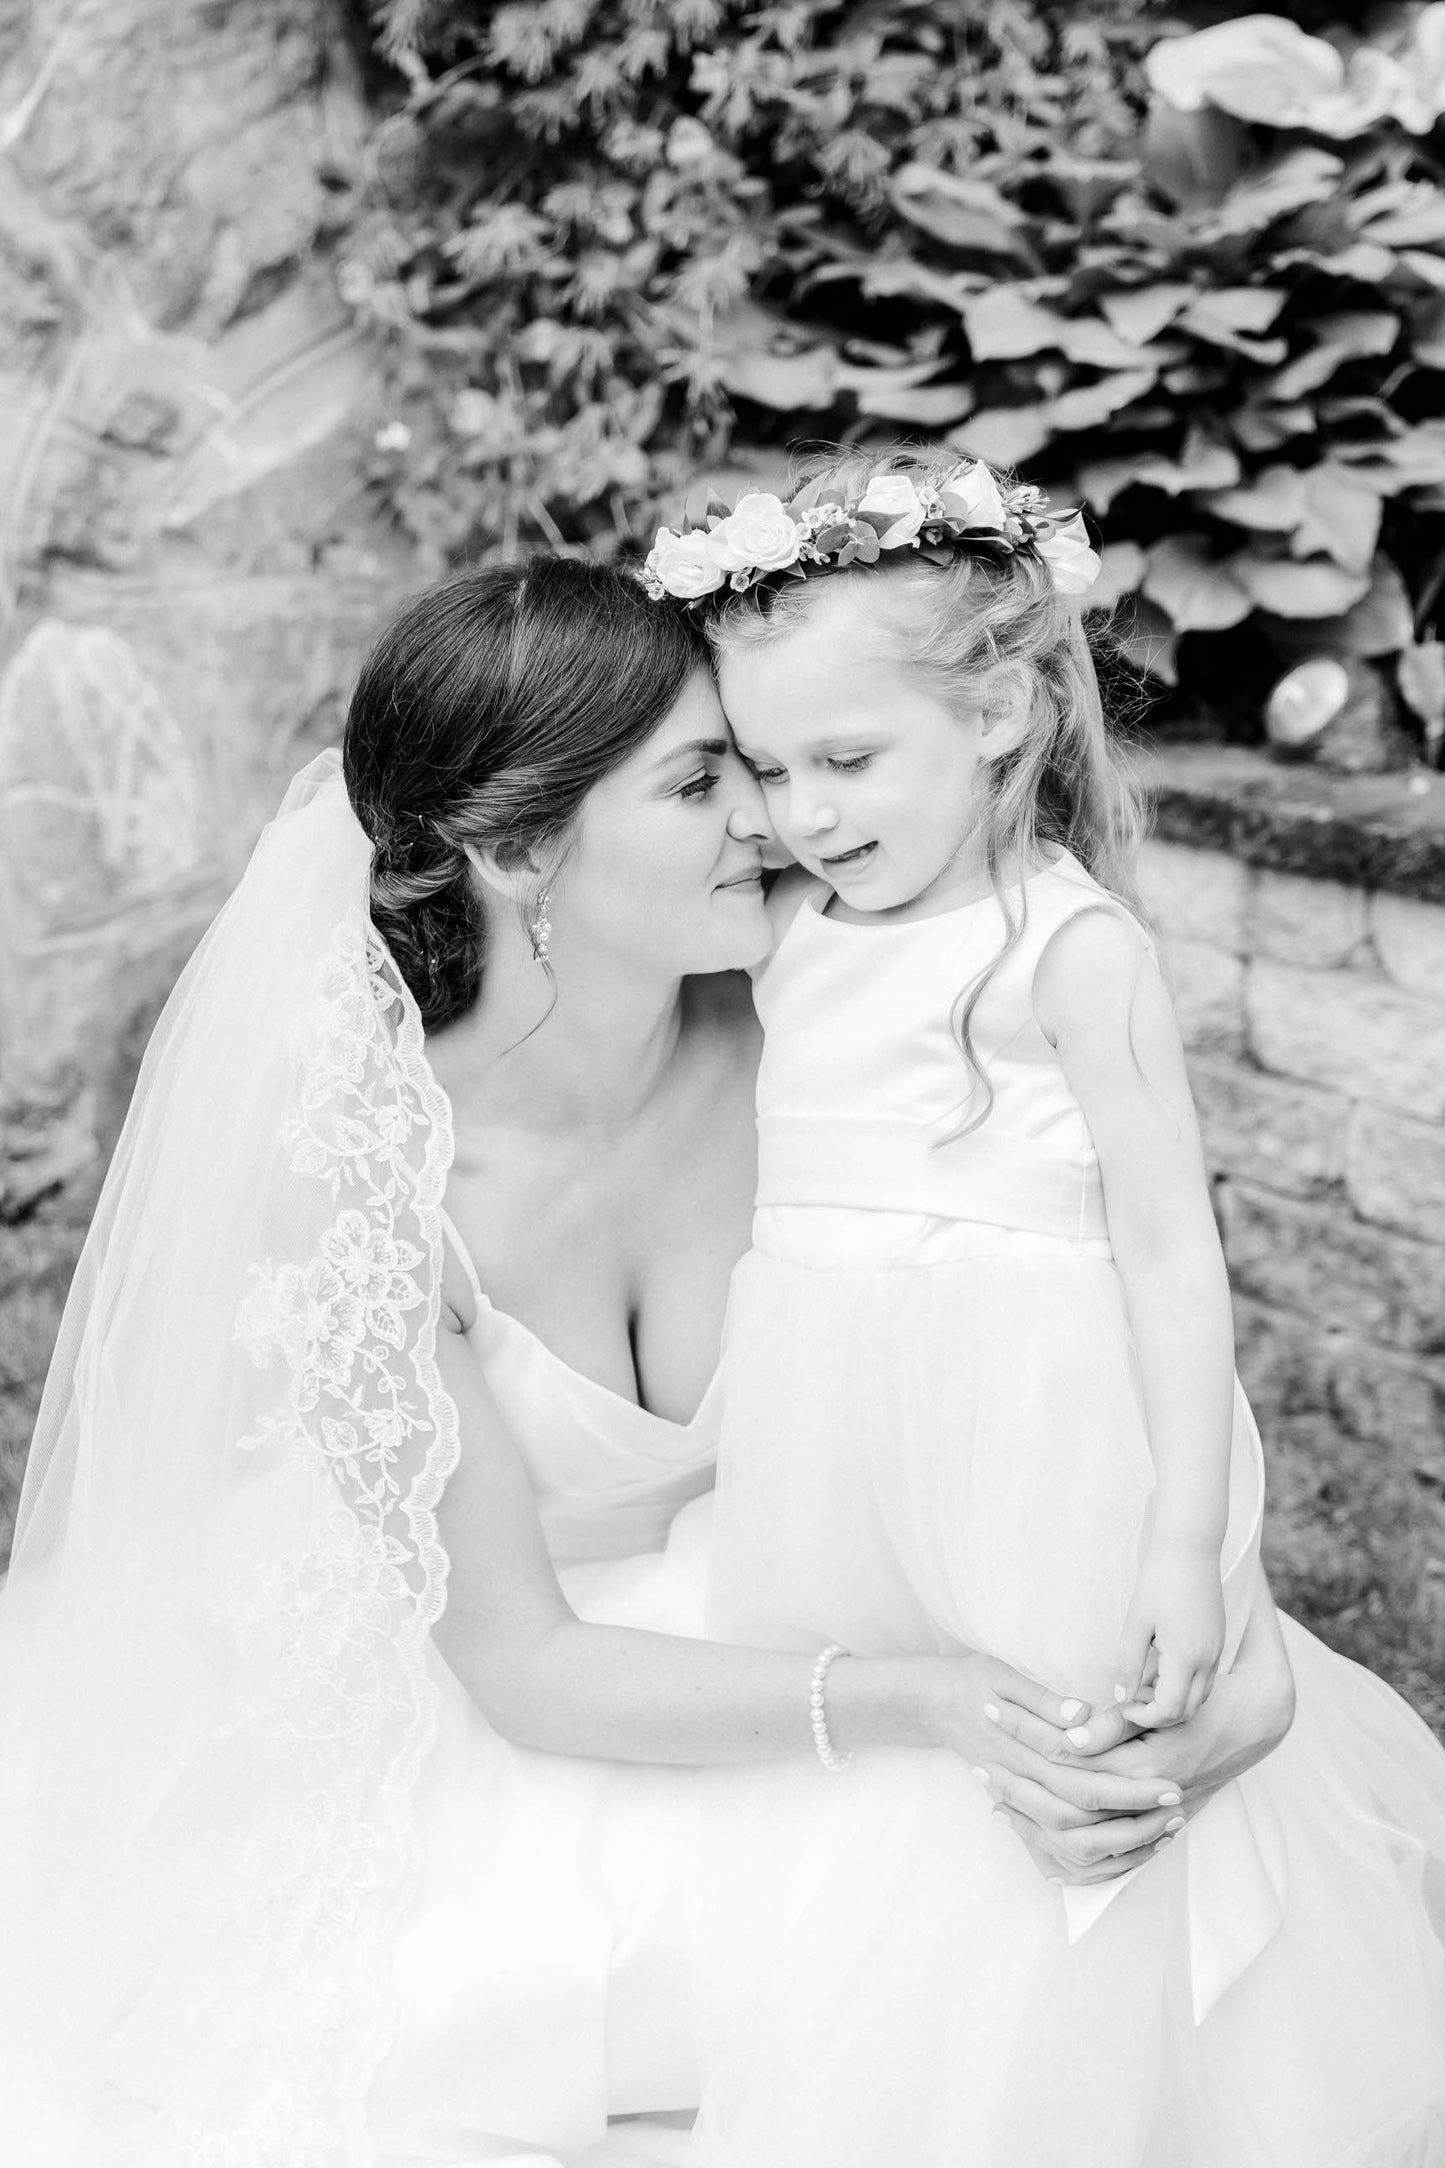 one blushing bride cathedral length lace bridal veil over low updo as bride embraces flower girl